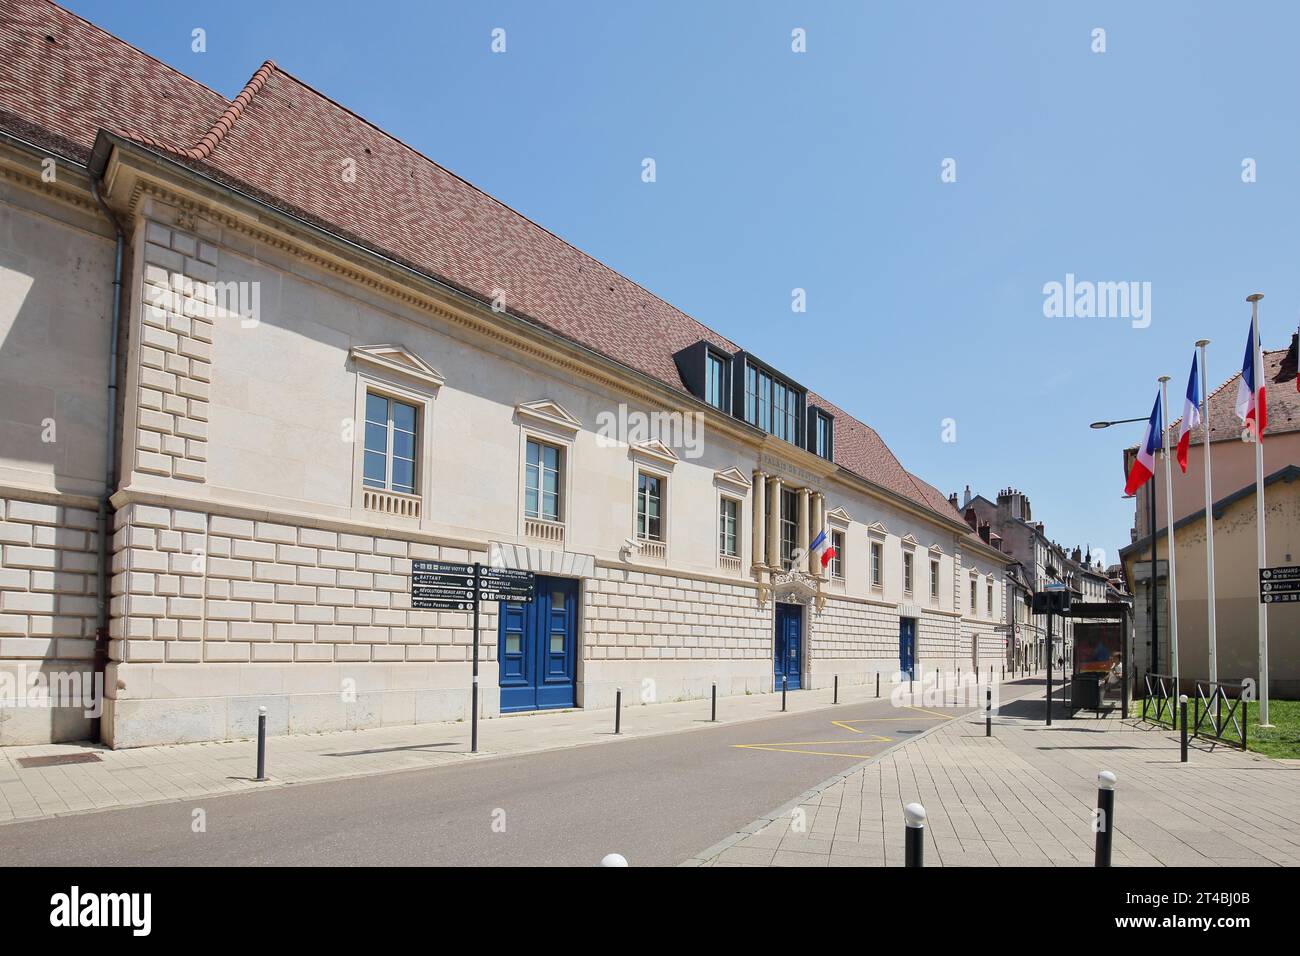 Palais de Justice with French national flags, Palace of Justice, Besancon, Besancon, Doubs, France Stock Photo